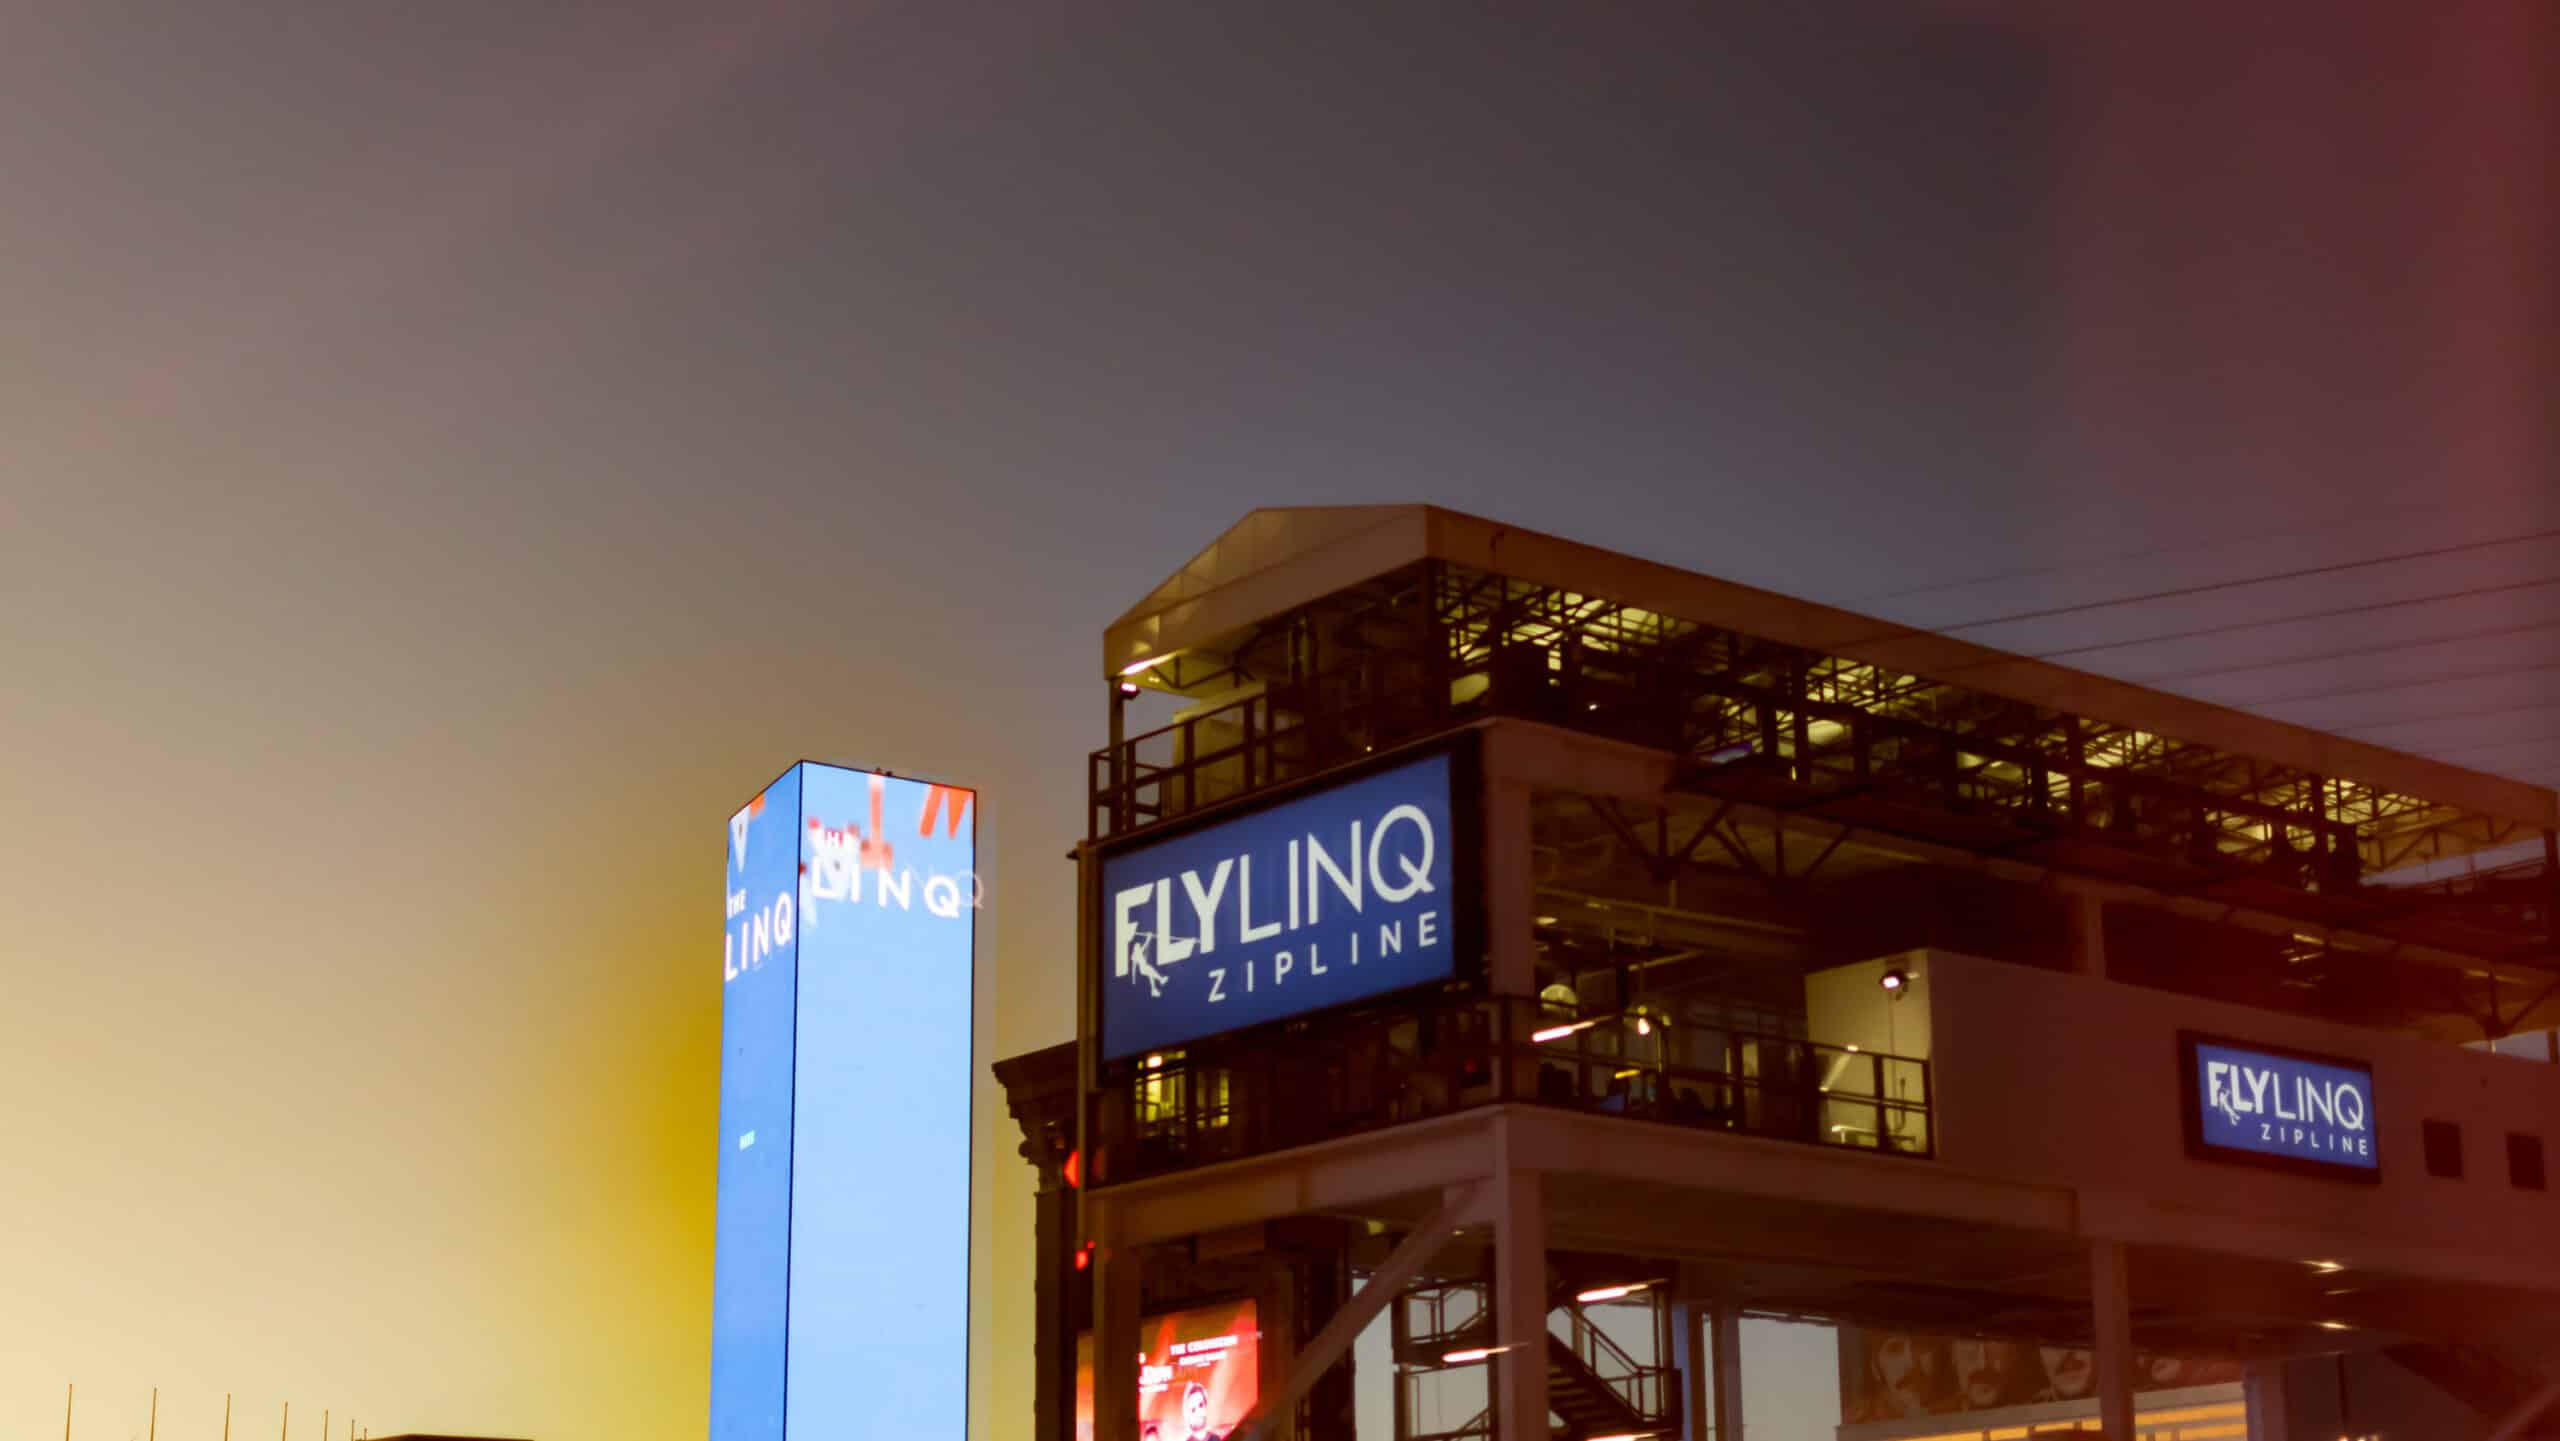 Fly LINQ zipline sign and building at dusk